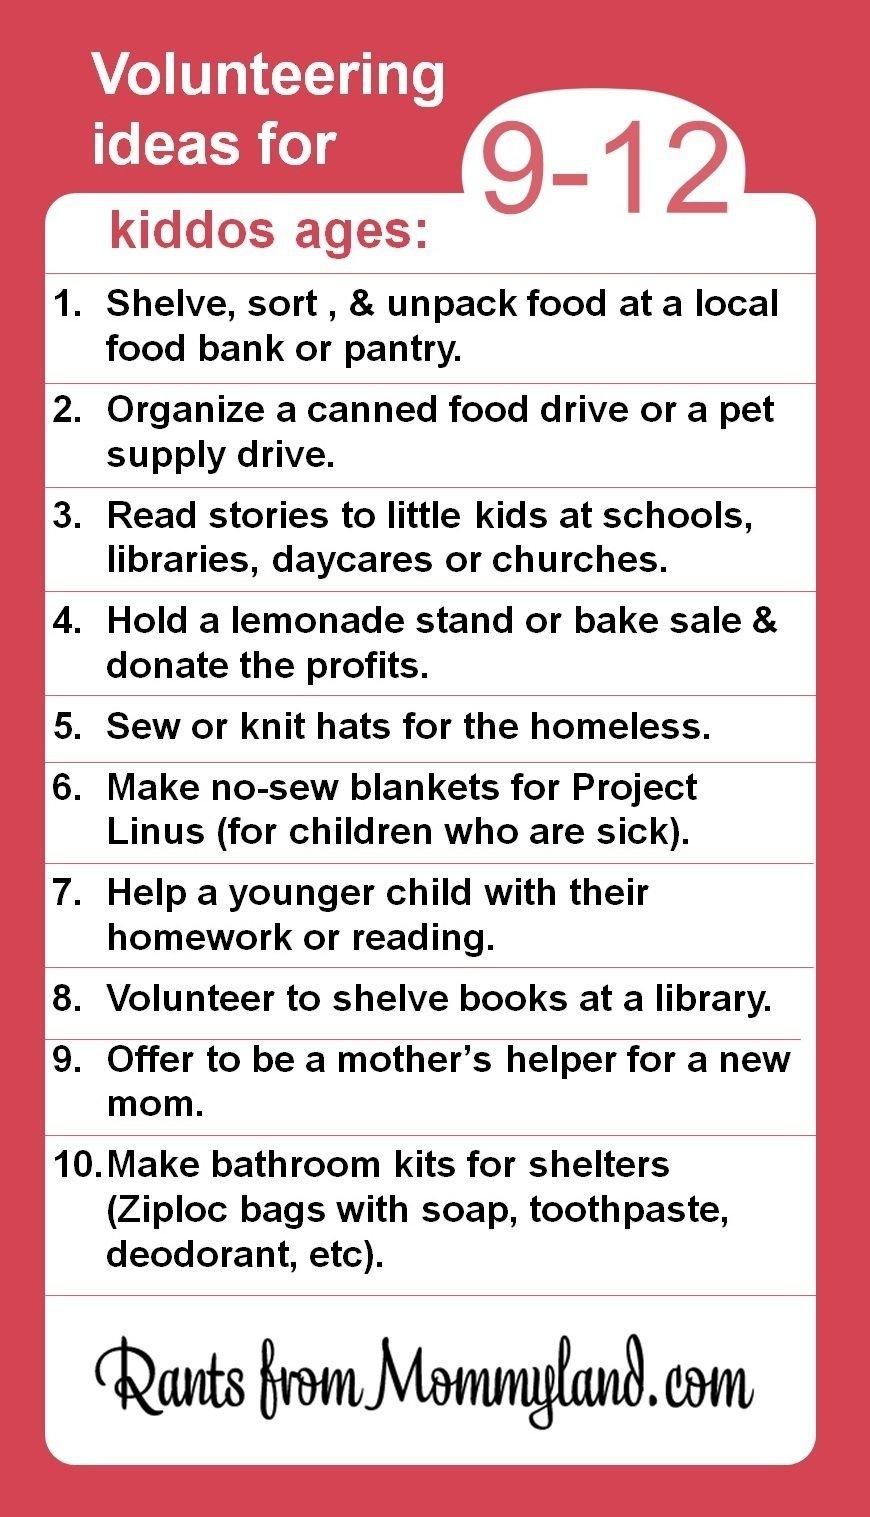 10 Fabulous Ideas For Community Service Projects volunteer and service ideas for kiddos ages 9 12 kids can do a lot 2 2023